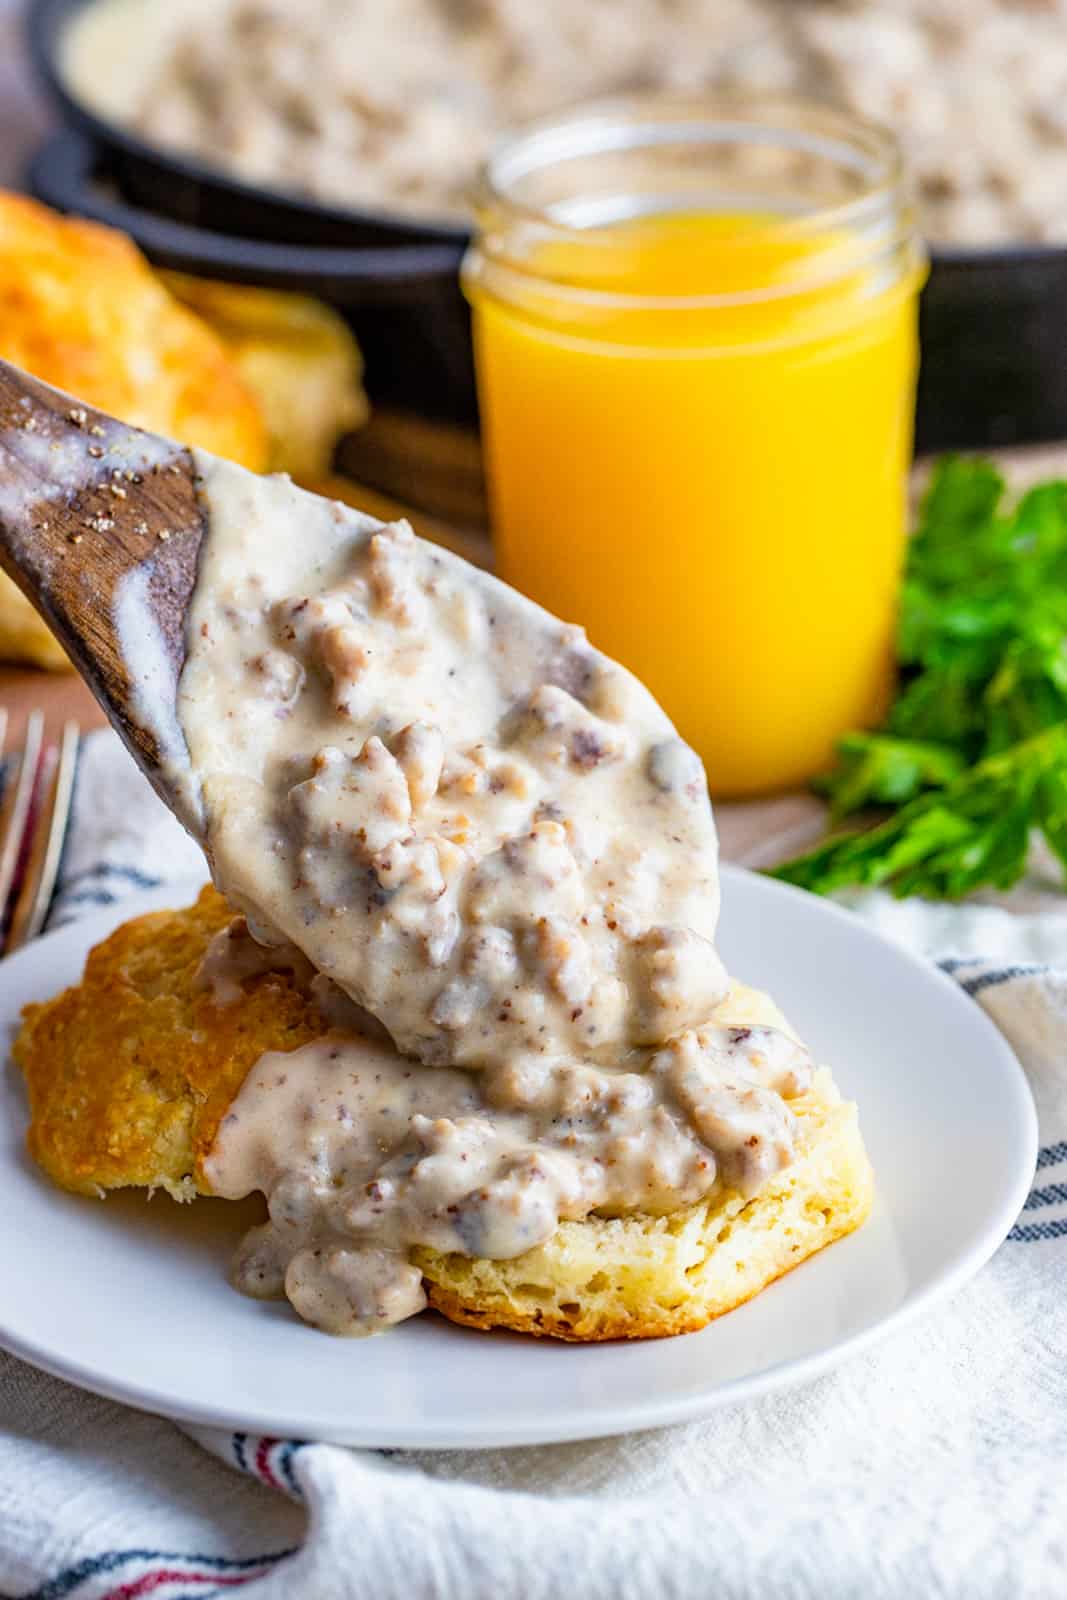 Spoon scooping Sausage Gravy over Biscuits